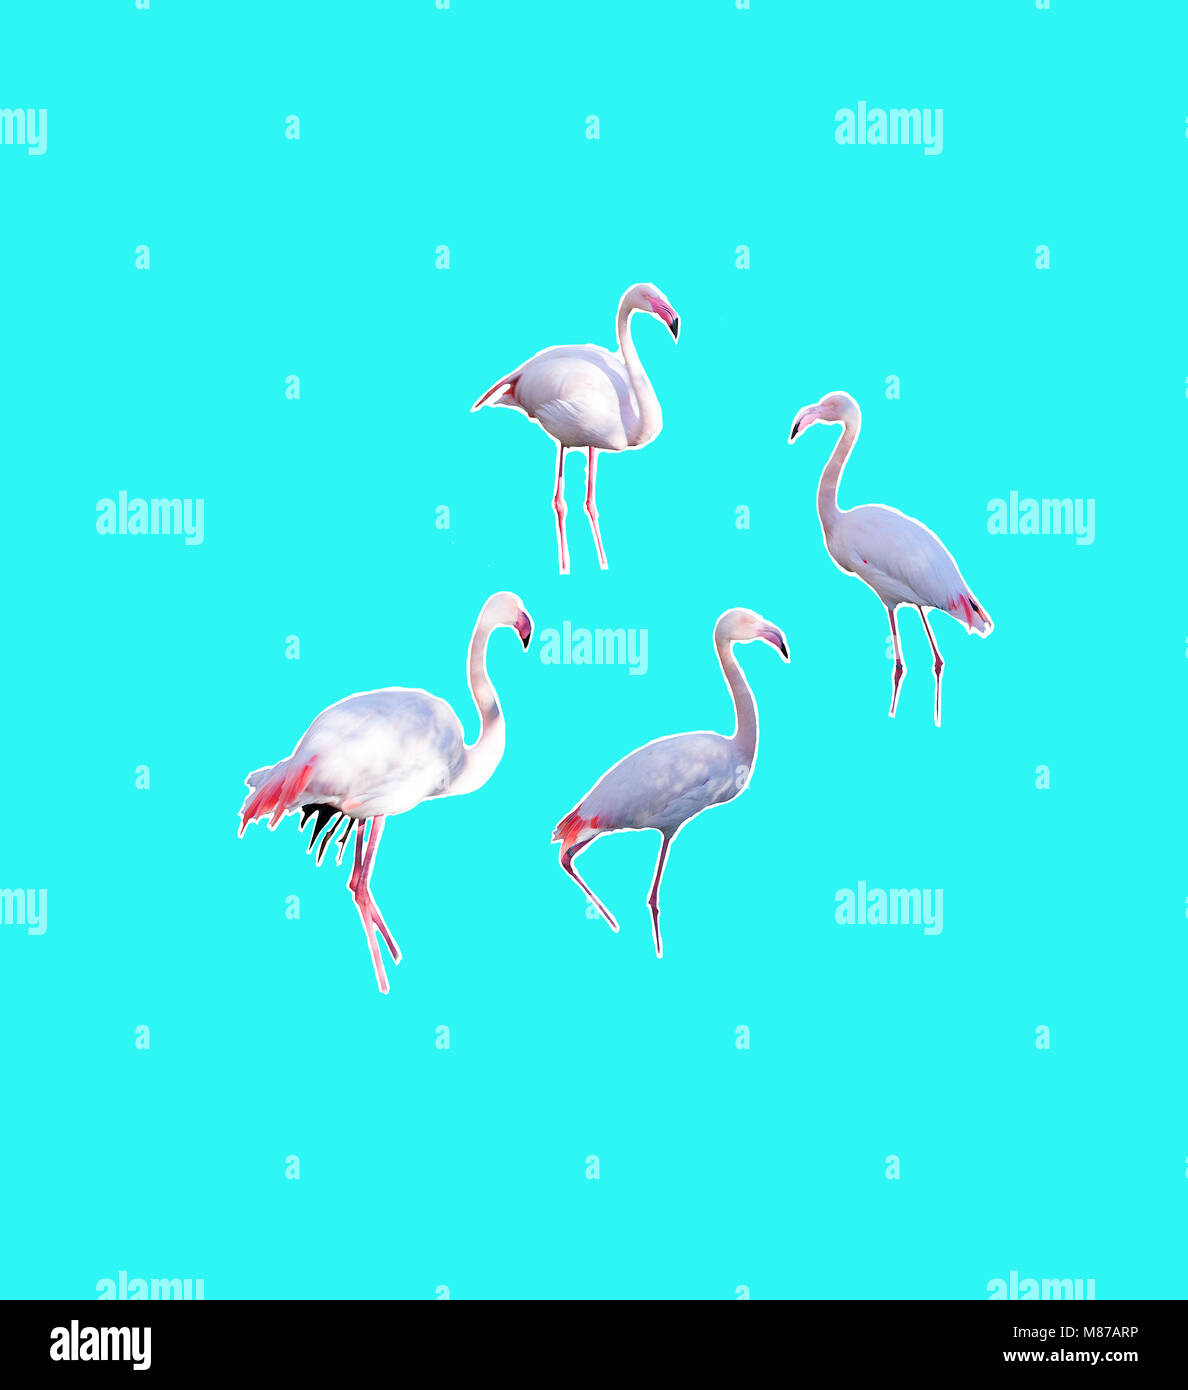 Four flamingos isolated on aqua turquoise background imaginary water without visible feet Stock Photo